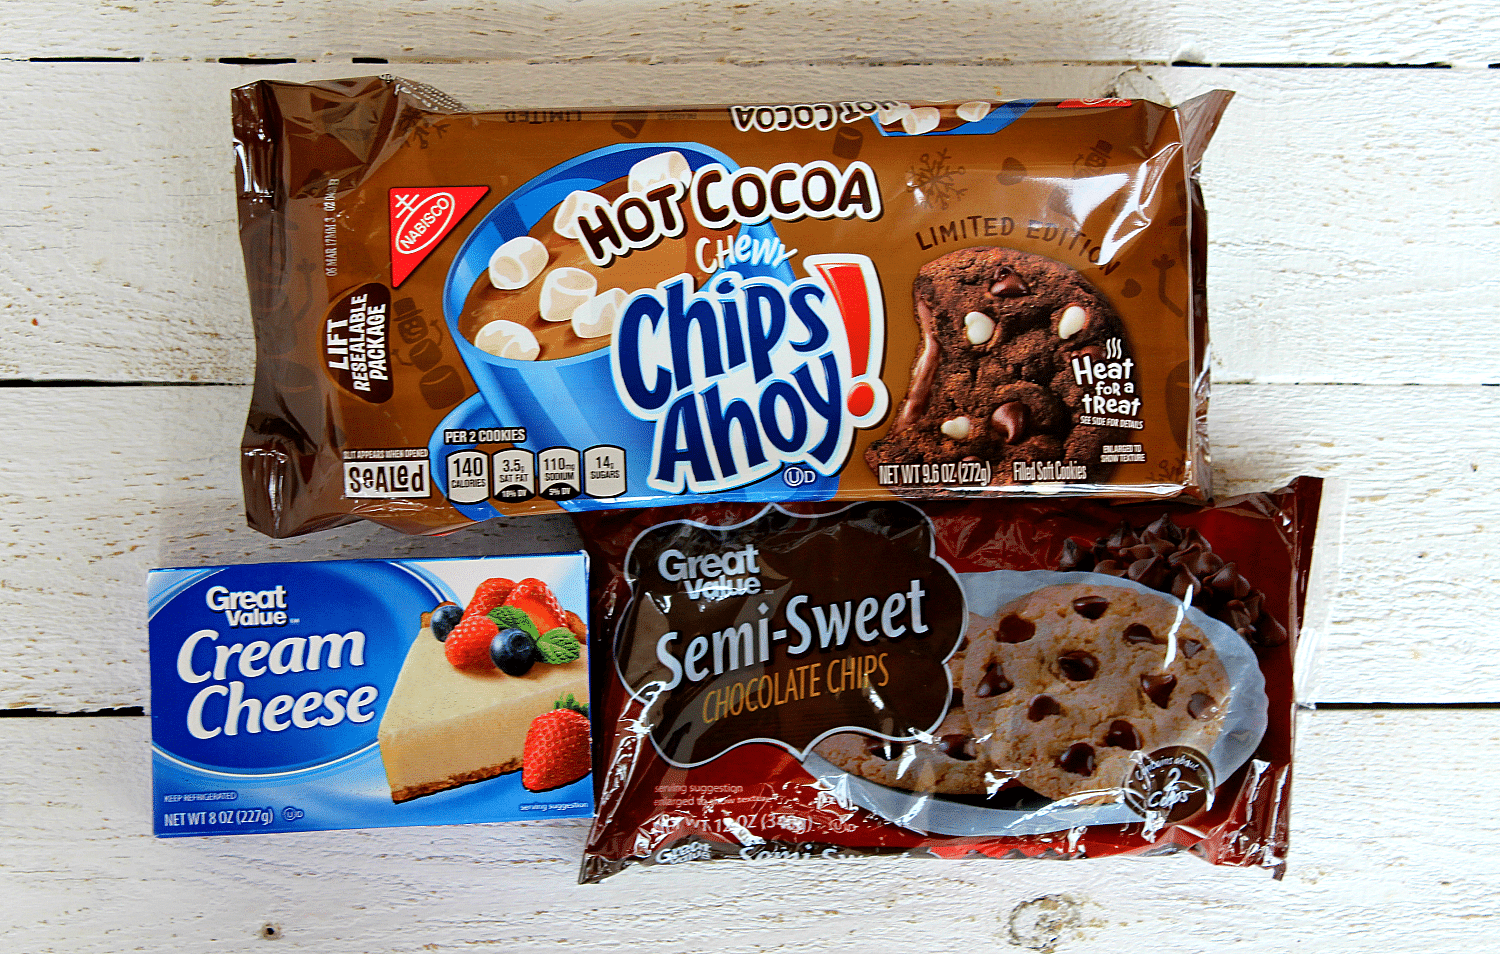 You'll need Hot Cocoa Chips Ahoy cookies, any type of chocolate chip cookies and cream cheese to make these truffles.